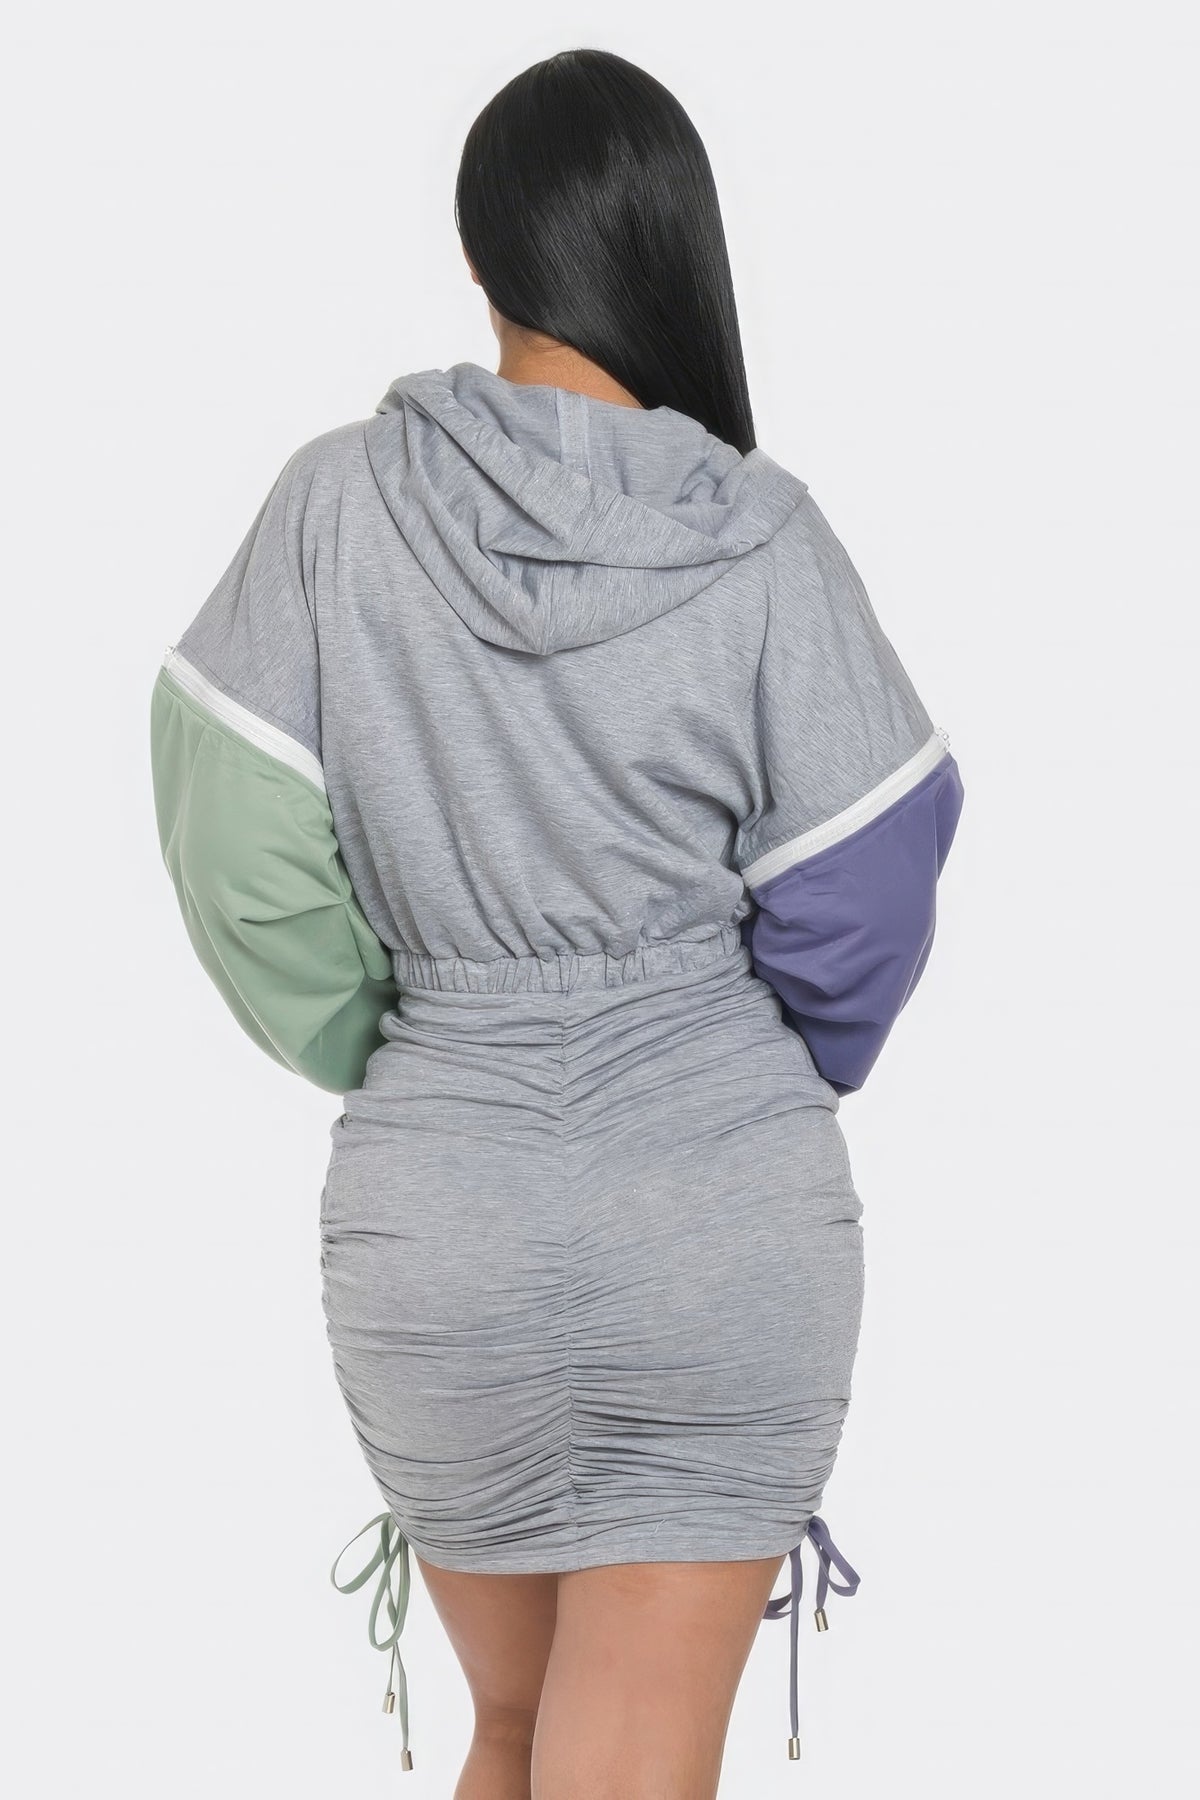 Sweater Dress Two In One Detachable Sleeve Zipper Color-block Casual Mini Dress with Hood